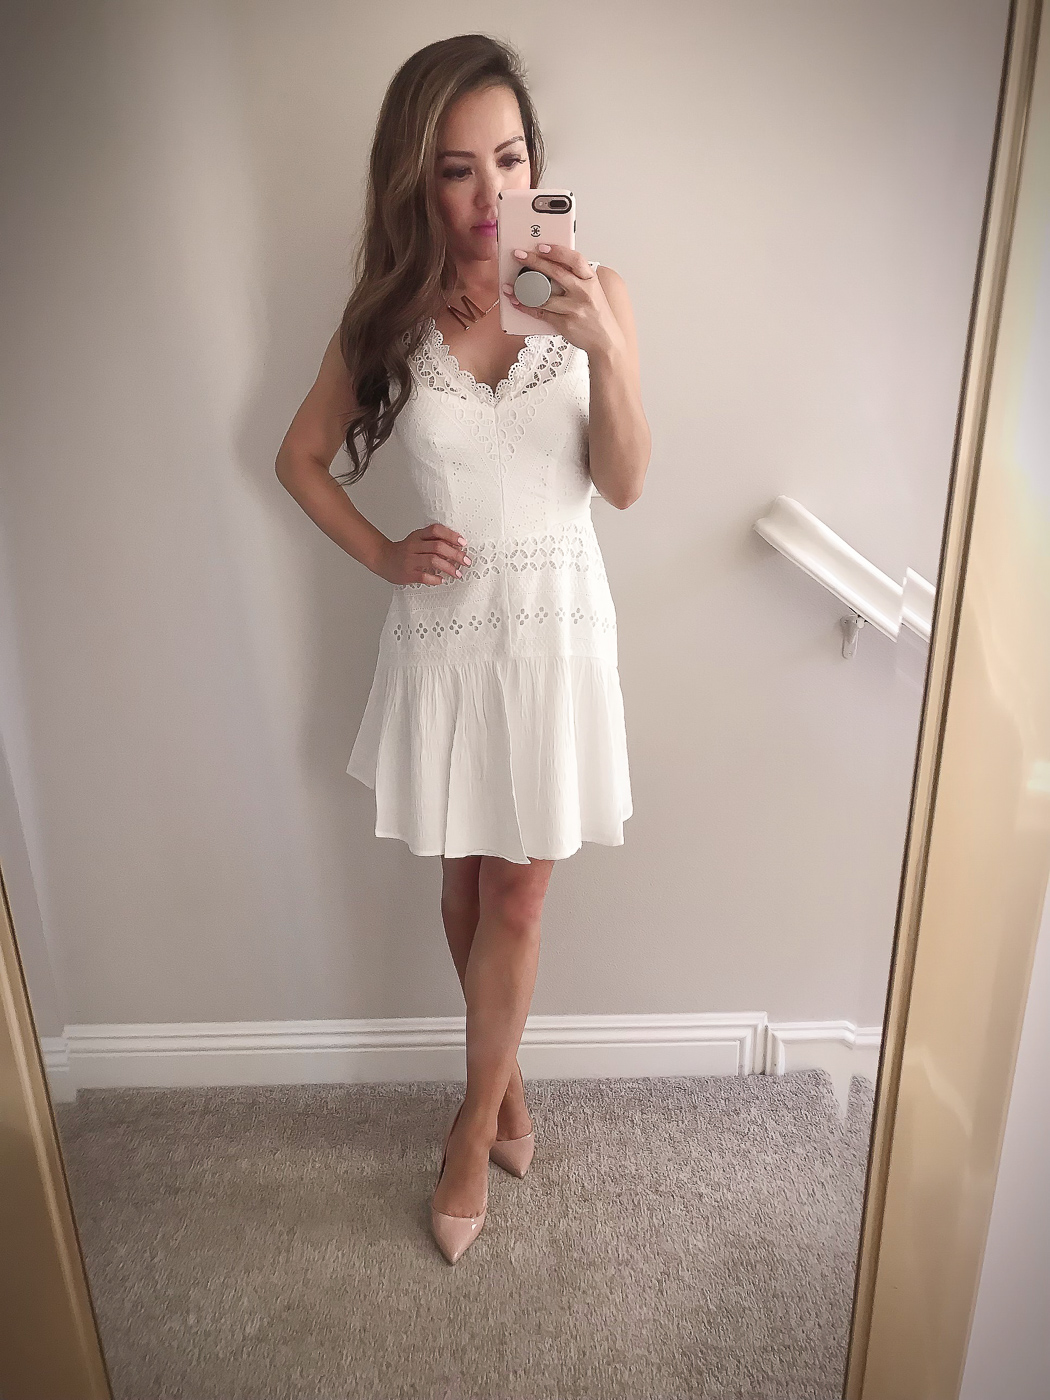 white eyelet dress nude pumps initial necklace